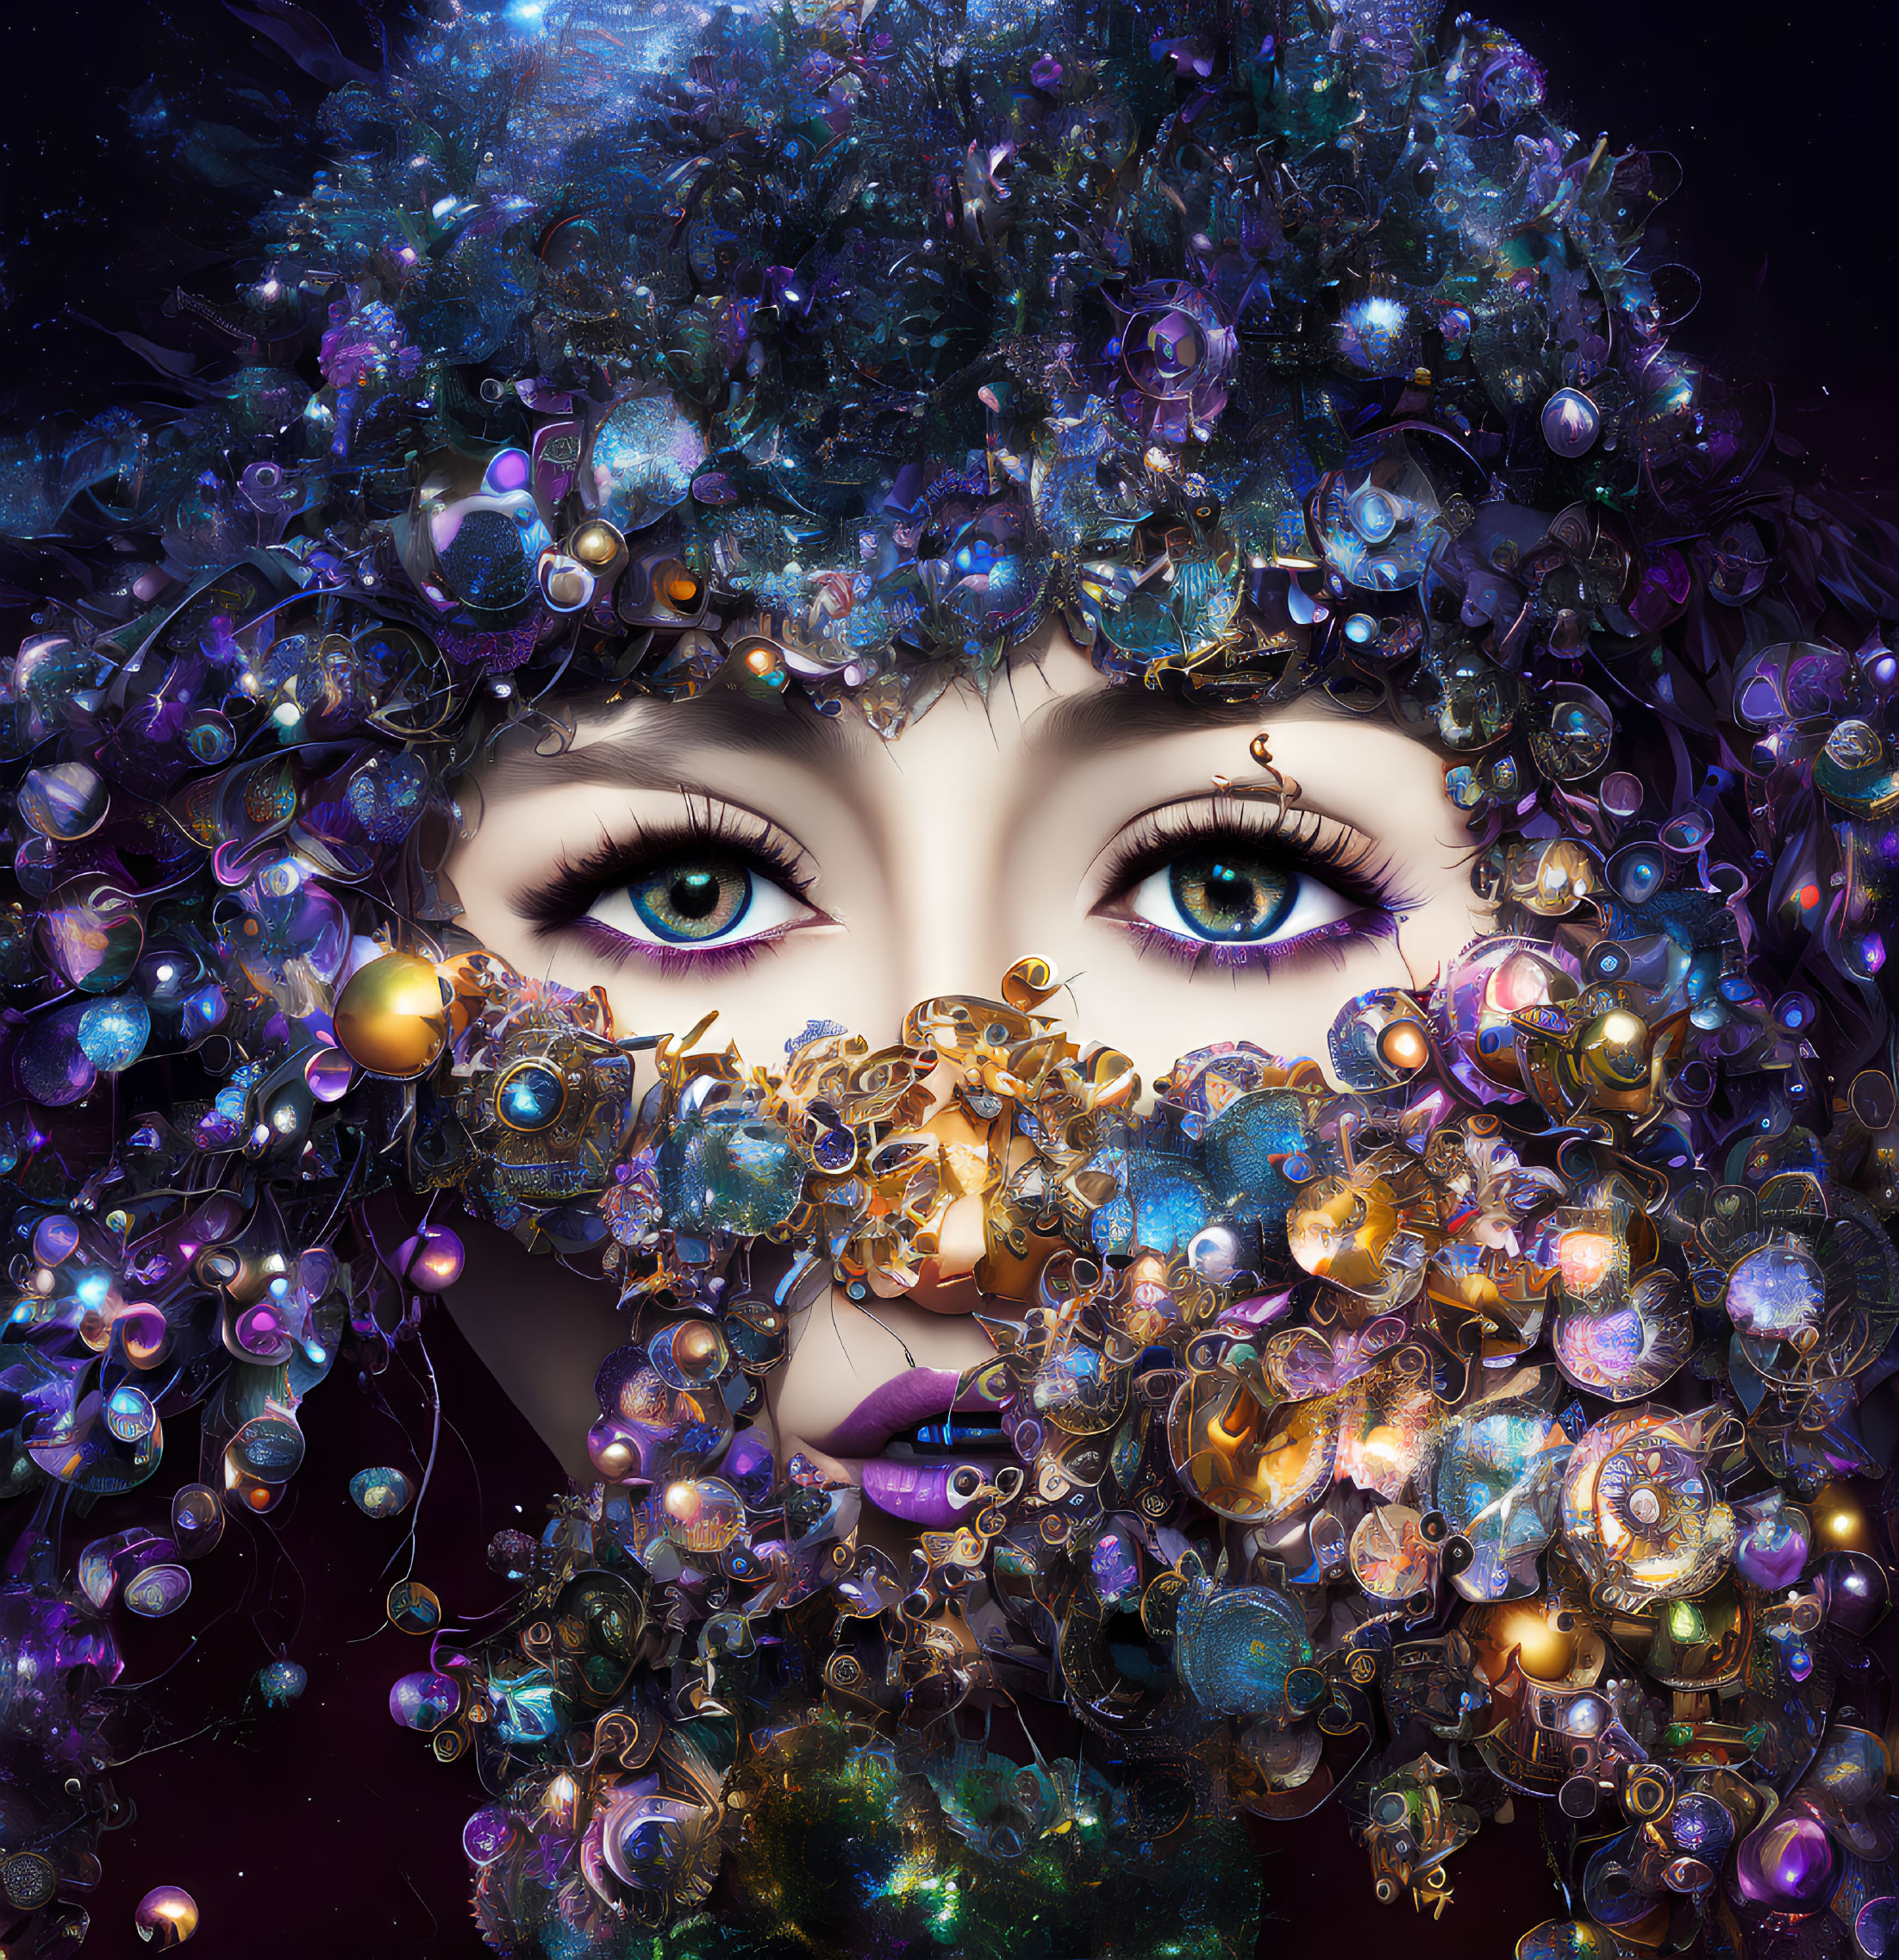 Surreal Female Face with Cosmic Elements and Mechanical Gears in Vibrant Setting